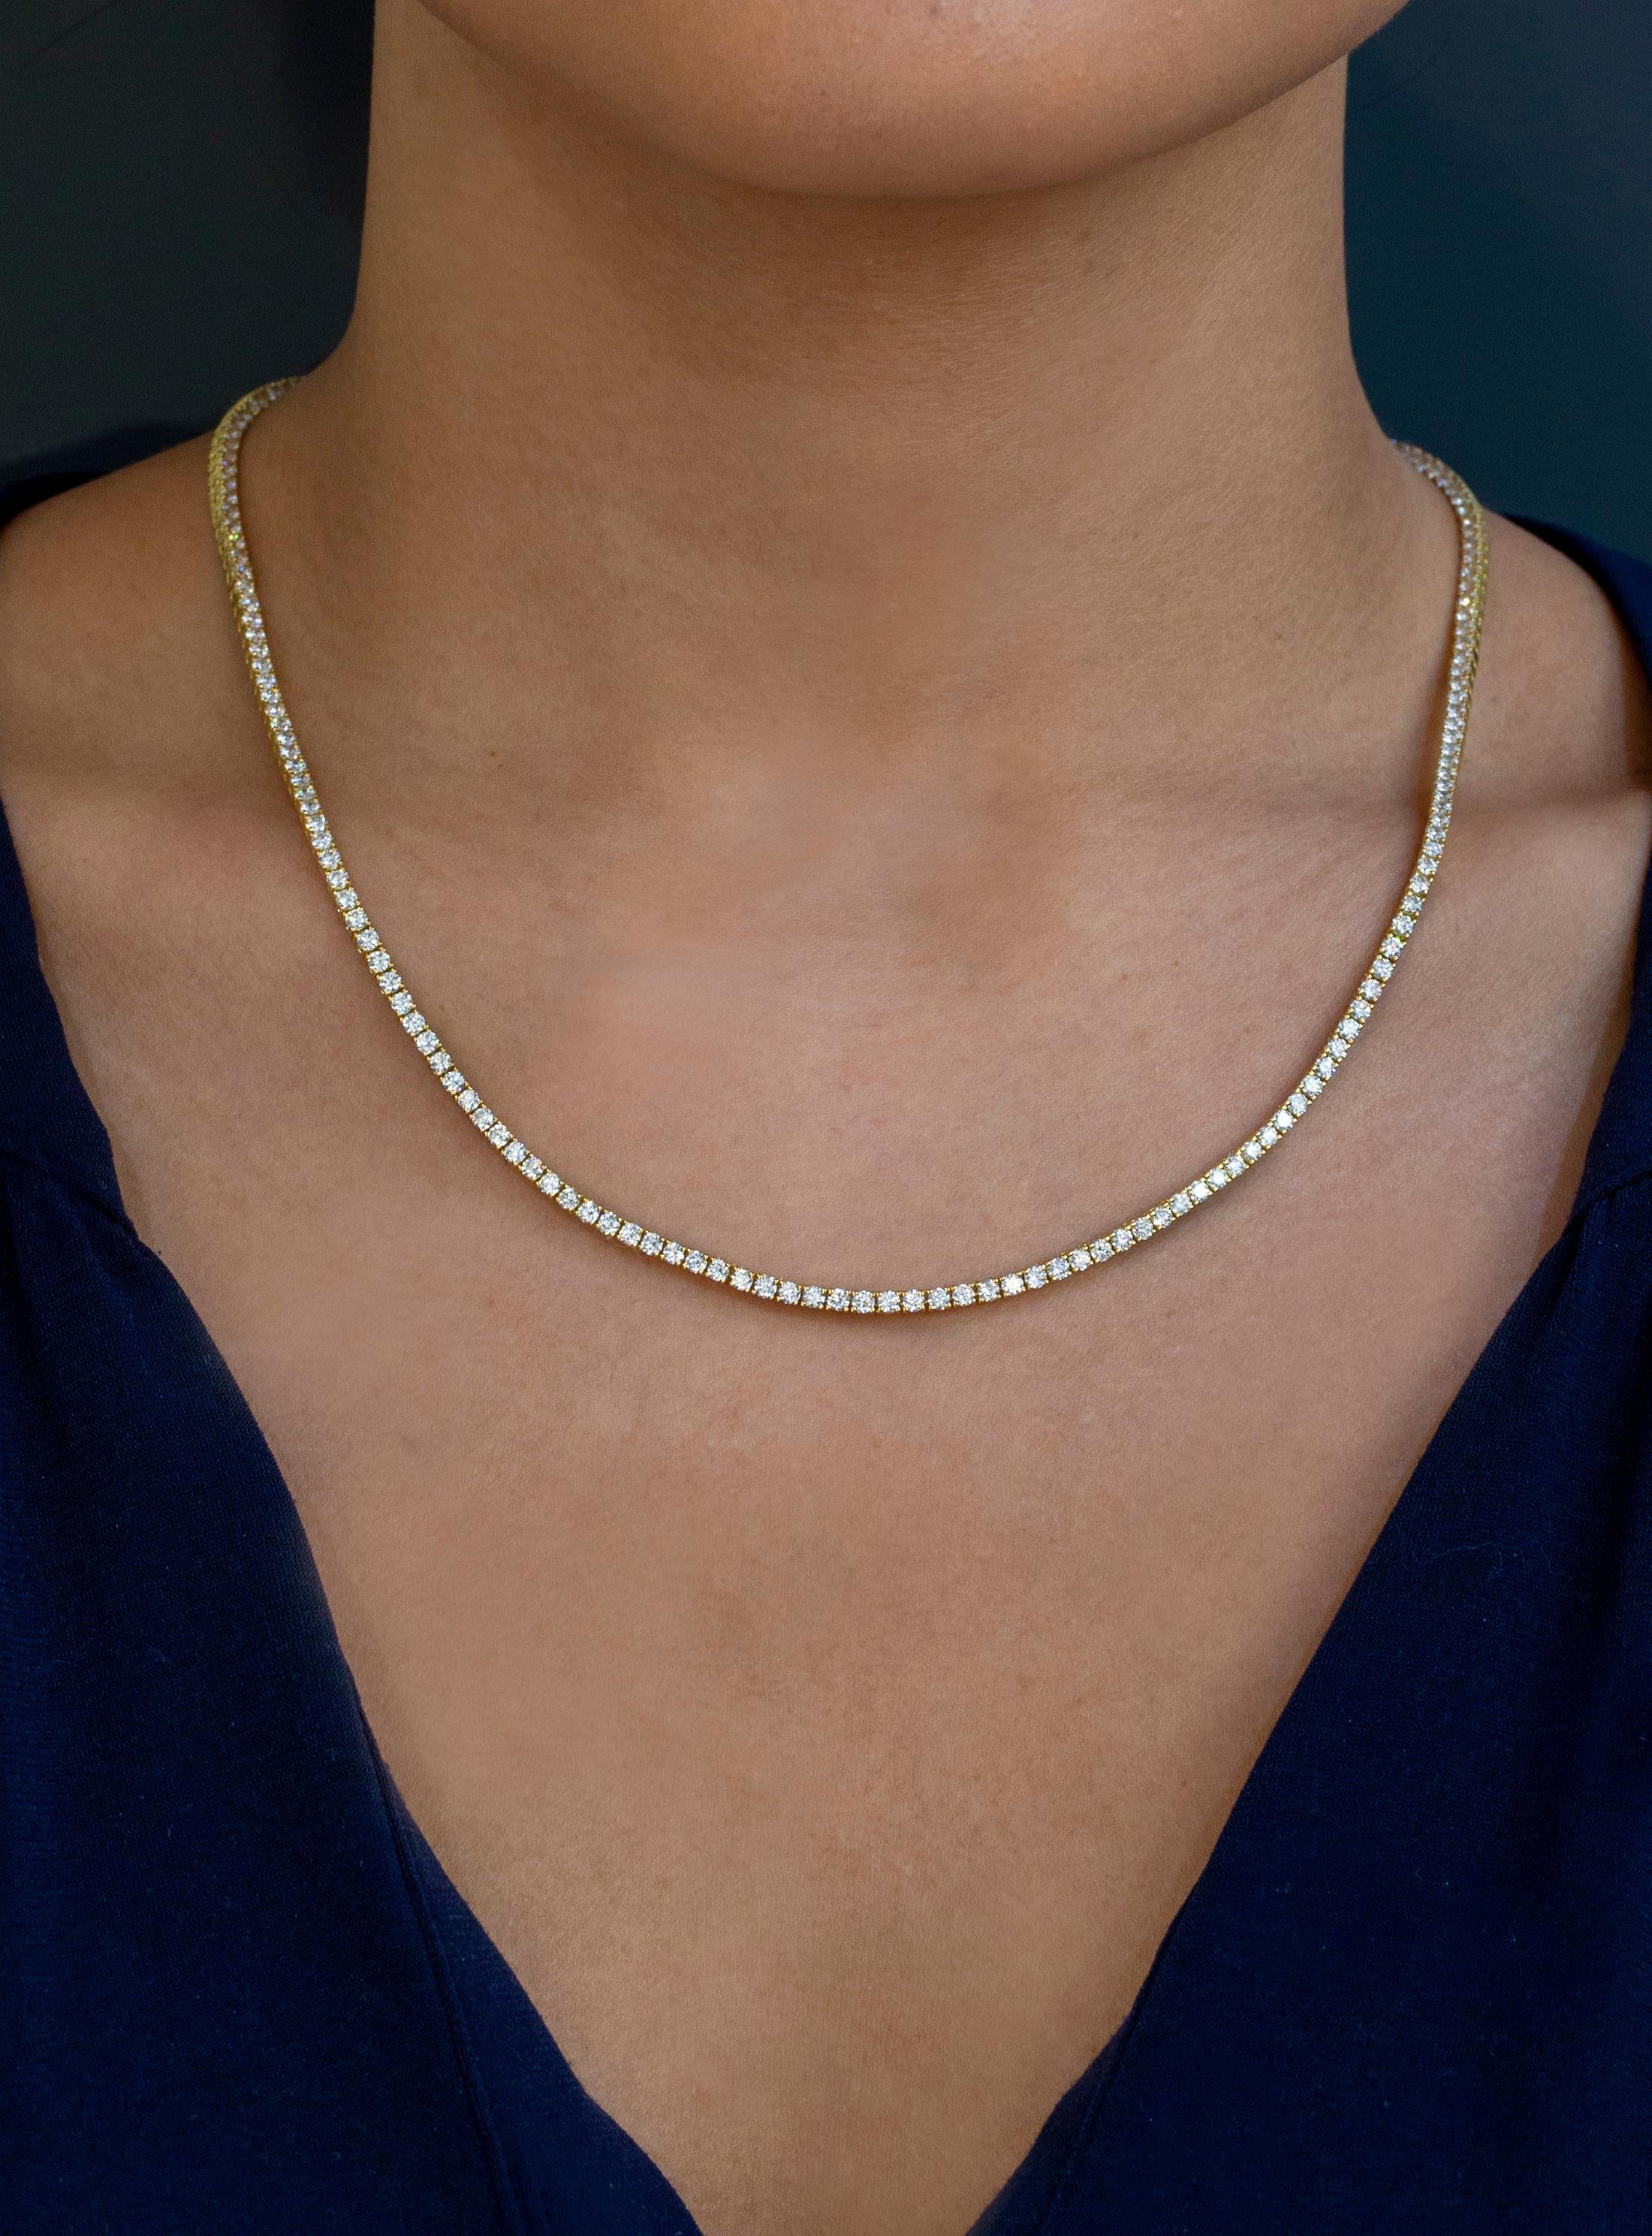 Contemporary Roman Malakov 7.52 Carat Total Round Diamond Tennis Necklace in Yellow Gold For Sale